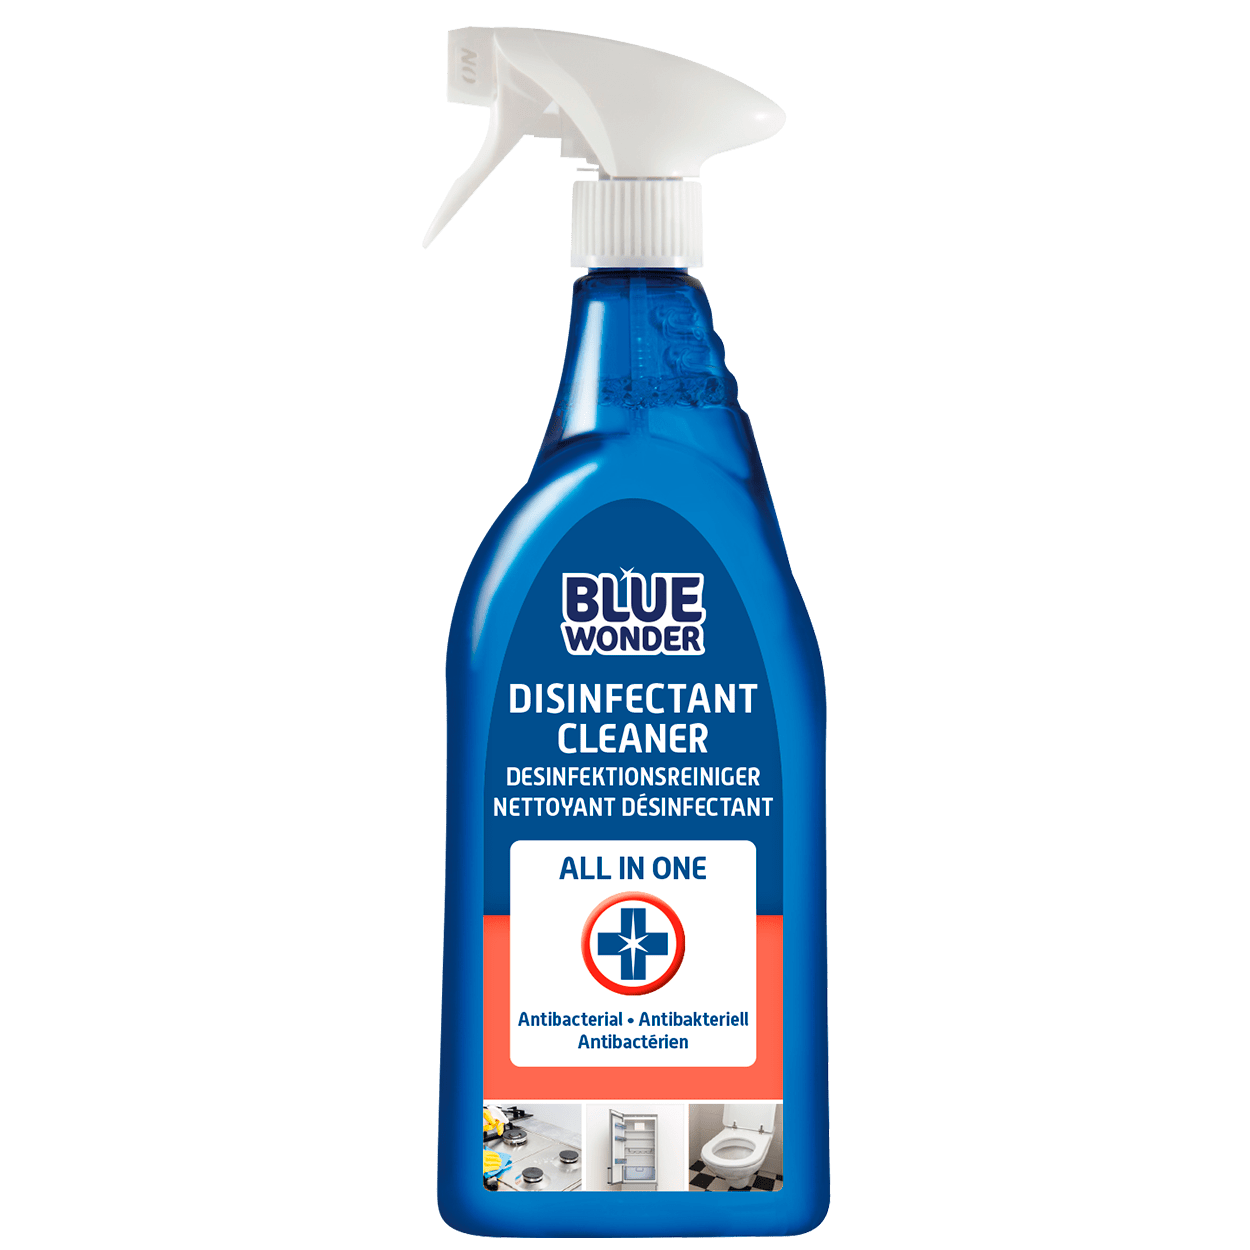 Blue Wonder Disinfectant Cleaner is unique because it cleans and disinfects at the same time. Blue Wonder Disinfectant Cleaner is suitable for daily cleaning of counter tops, the toilet, the bathroom, door handles, tables, worktops, the fridge, toys and much more. Chlorine-free. Blue Wonder Disinfectant Spray is ready to use.